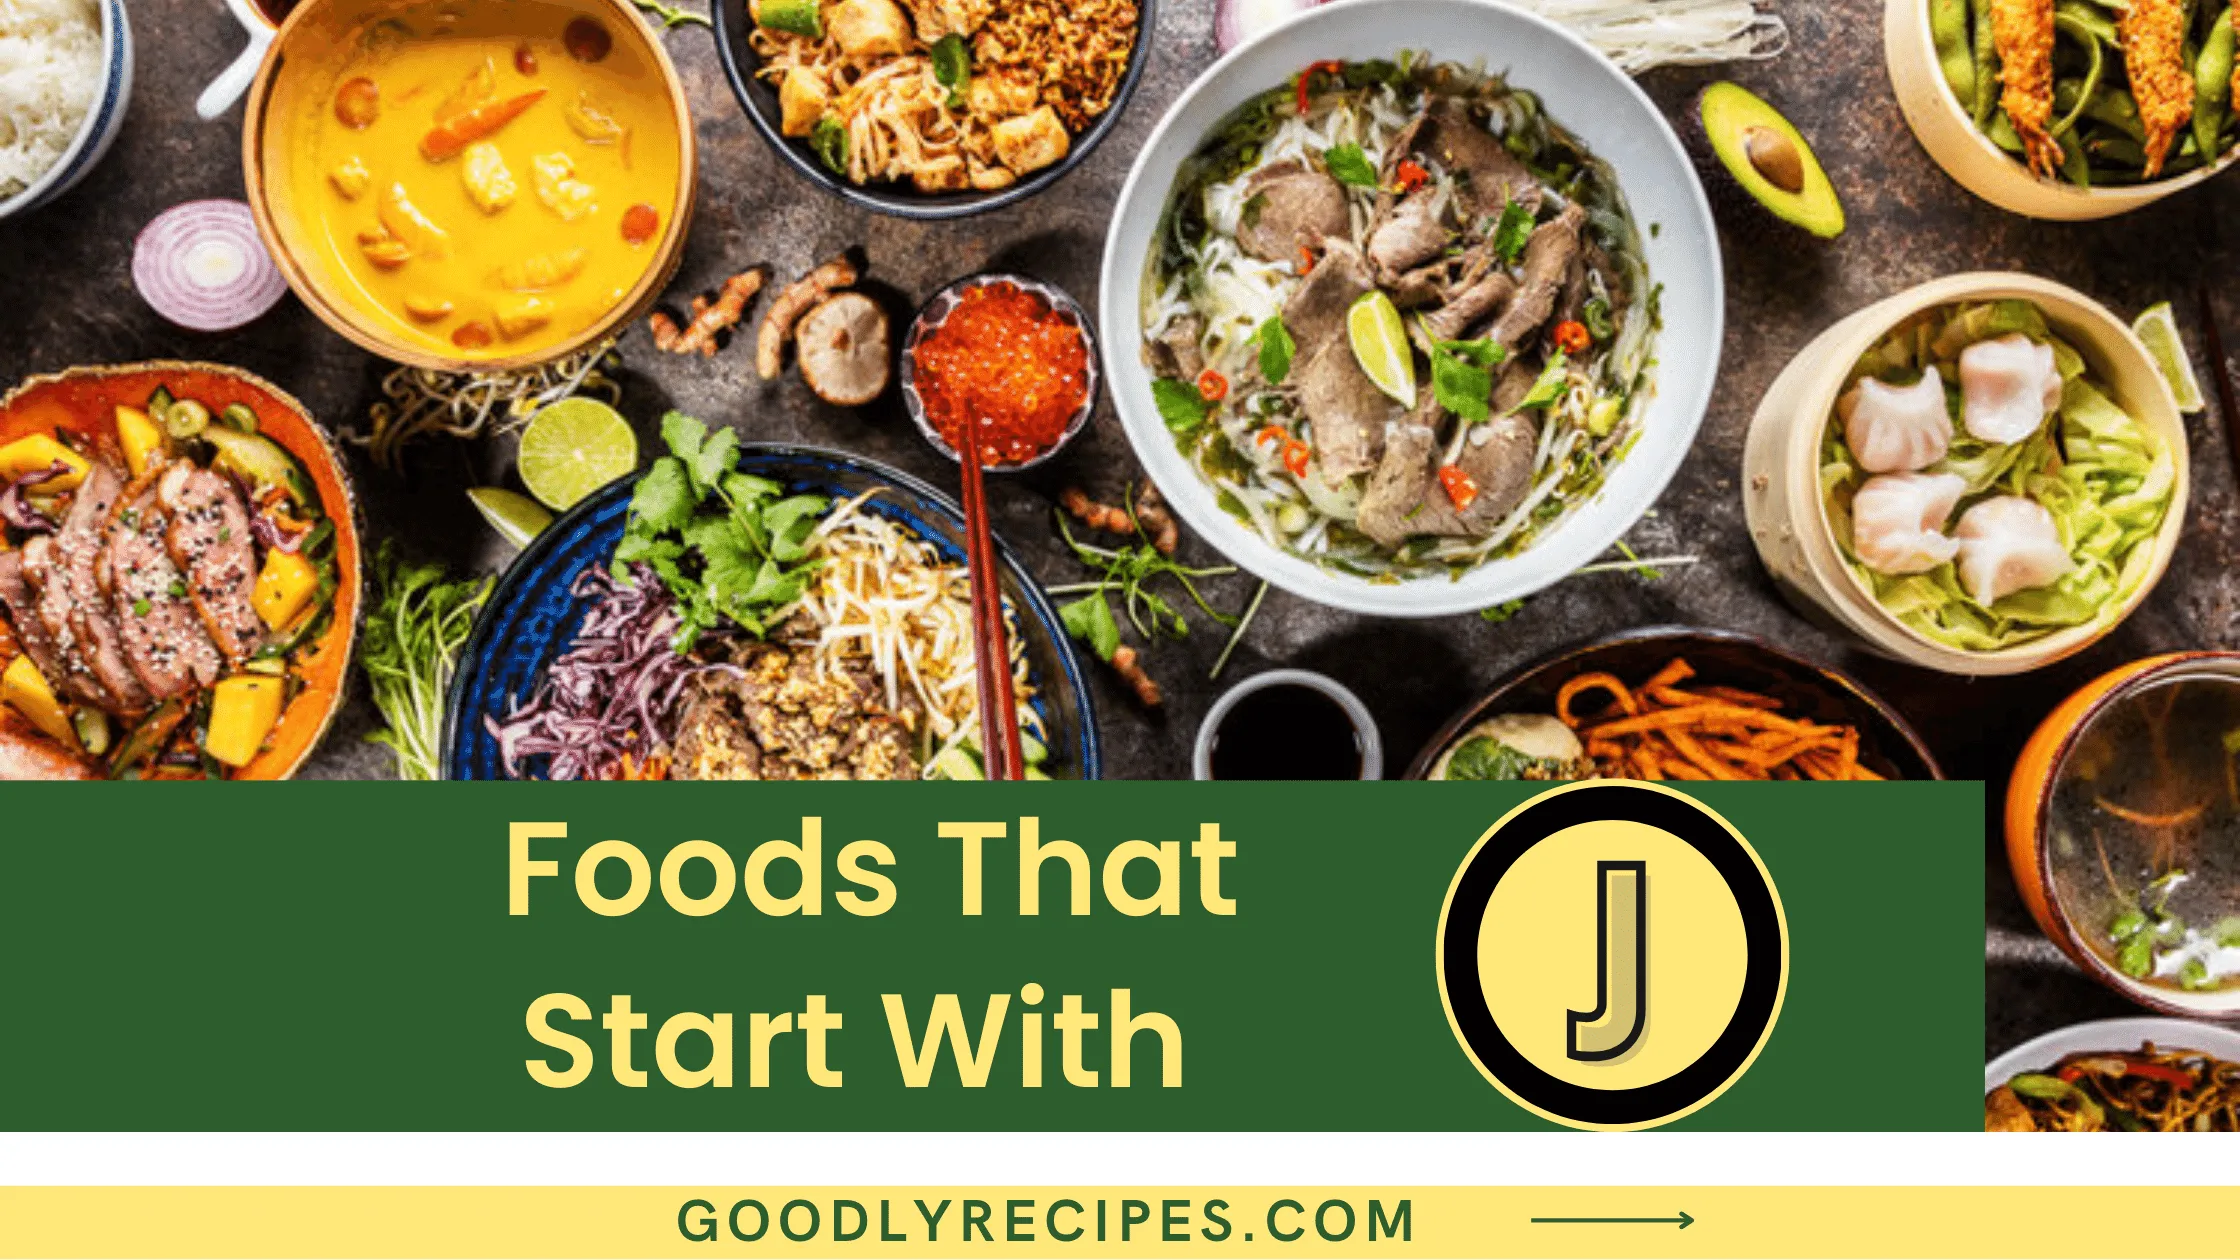 Foods That Start With J - Special Dishes